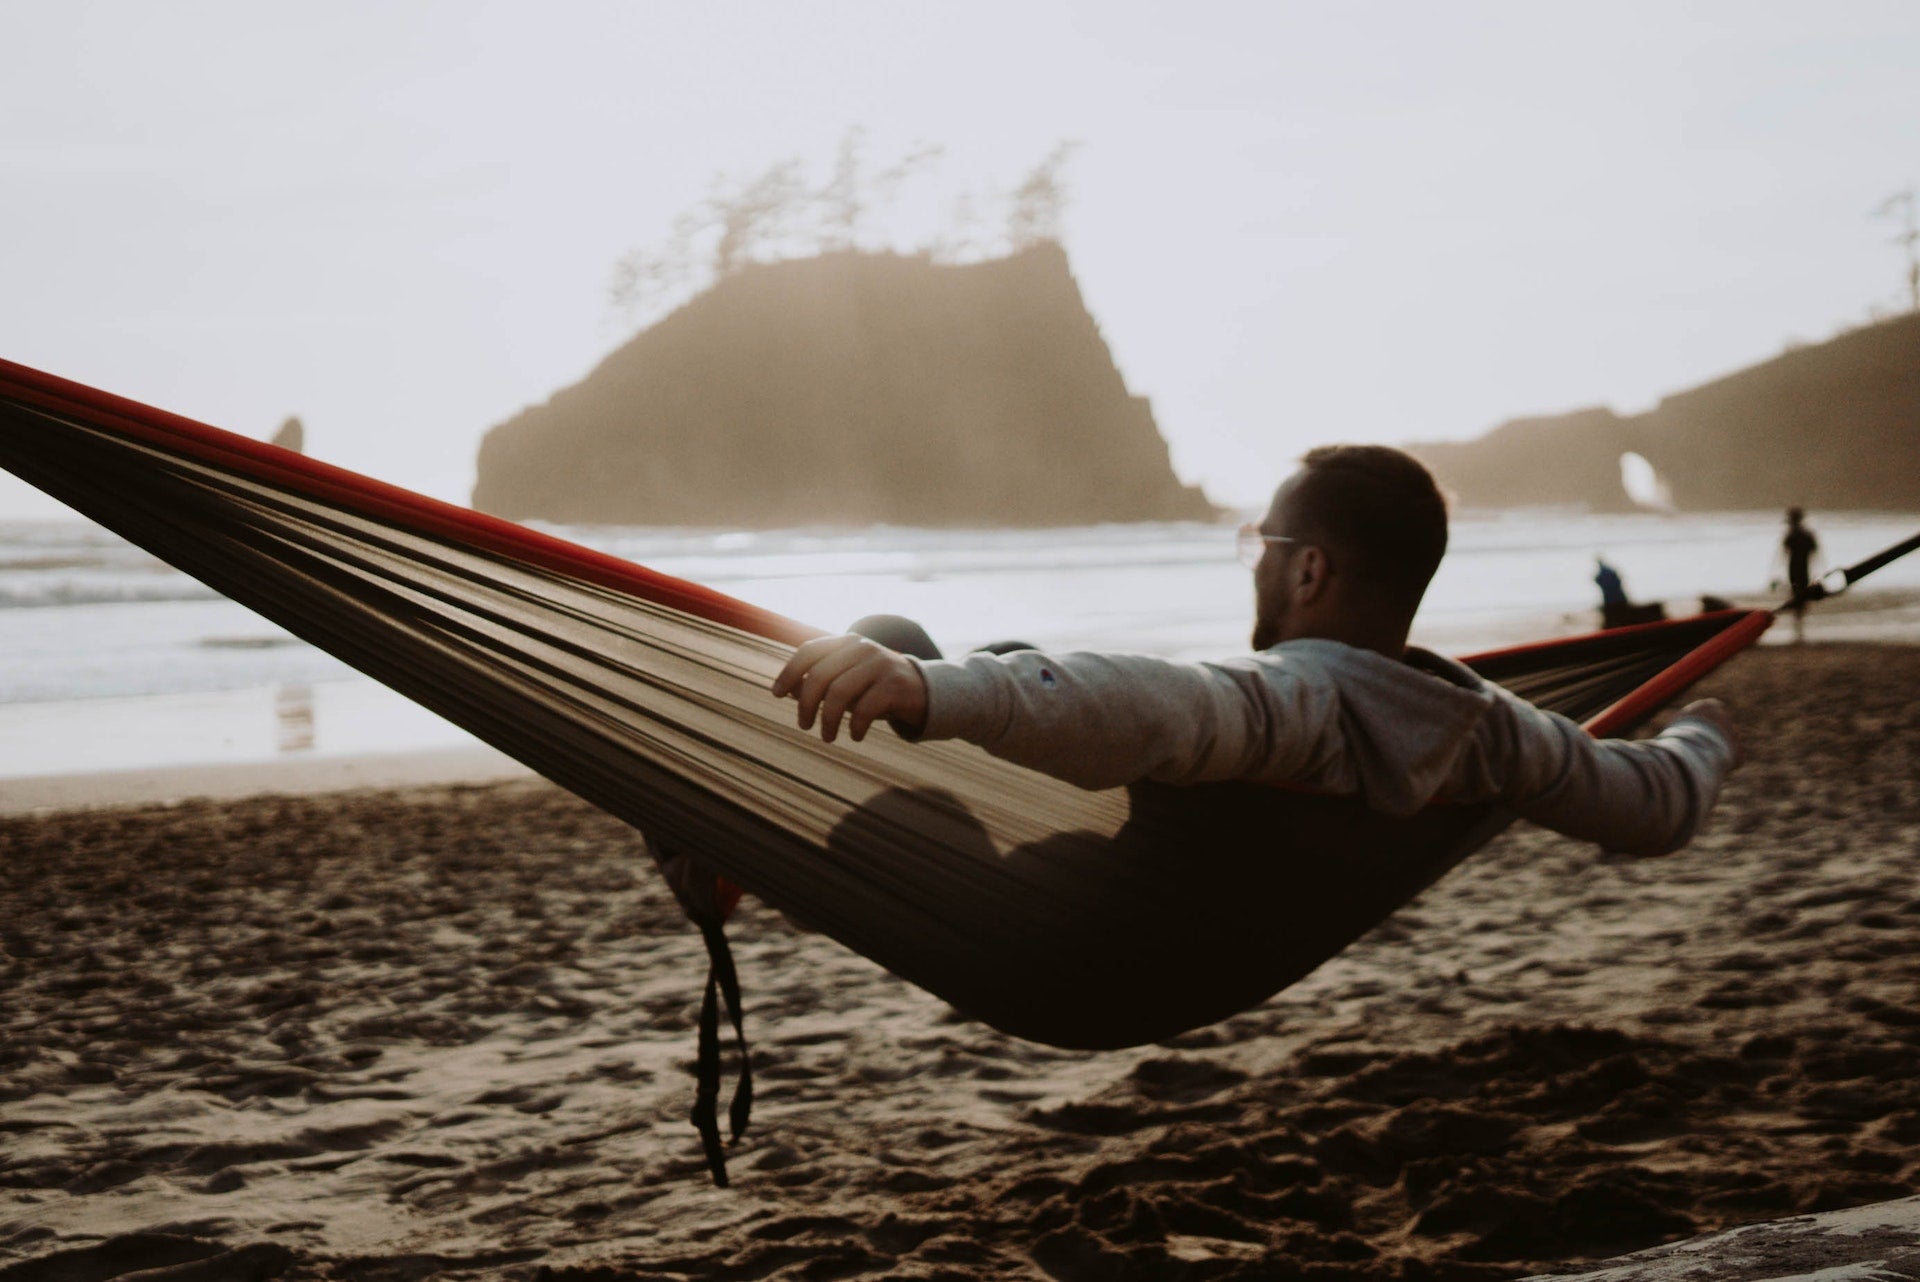 Top 10 Hammocks and Stands for Outdoor Relaxation